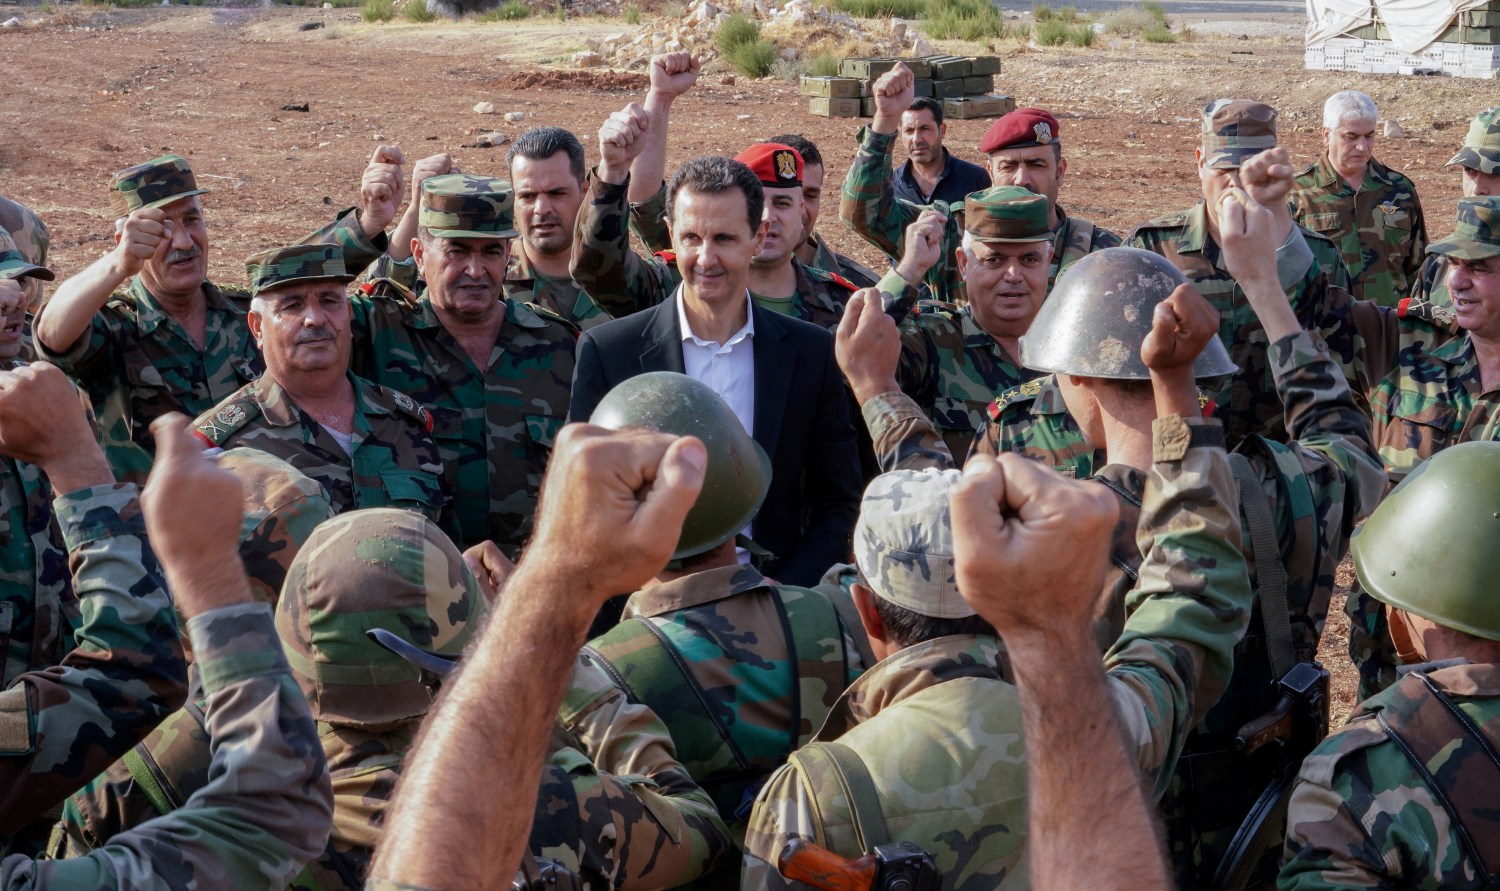 Syrian President Bashar al Assad visits Syrian army troops in war-torn northwestern Idlib province, Syria, in this handout released by SANA on October 22, 2019. SANA/Handout via REUTERS ATTENTION EDITORS - THIS IMAGE WAS PROVIDED BY A THIRD PARTY. REUTERS IS UNABLE TO INDEPENDENTLY VERIFY THIS IMAGE.